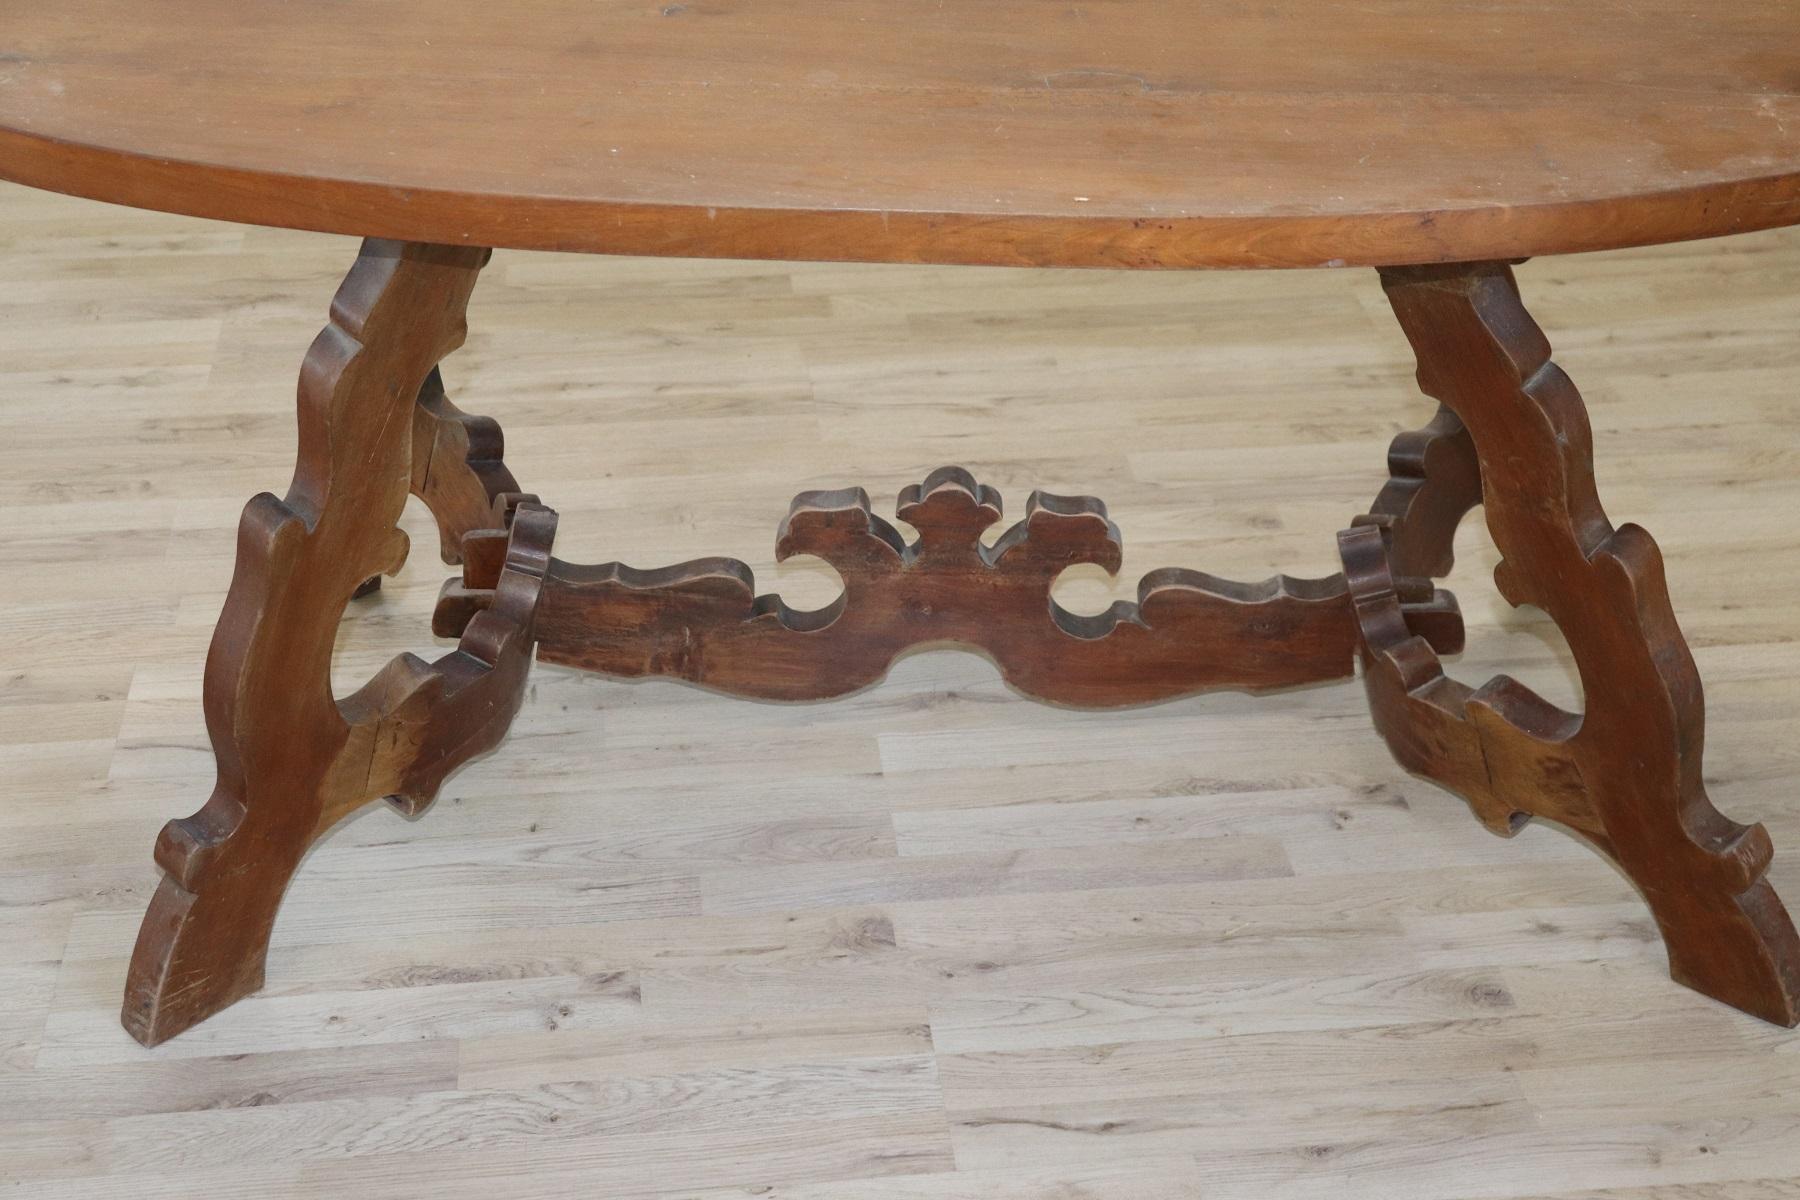 20th Century Italian Fratino Walnut Wood Oval Table with Lyre-Shaped Legs For Sale 4